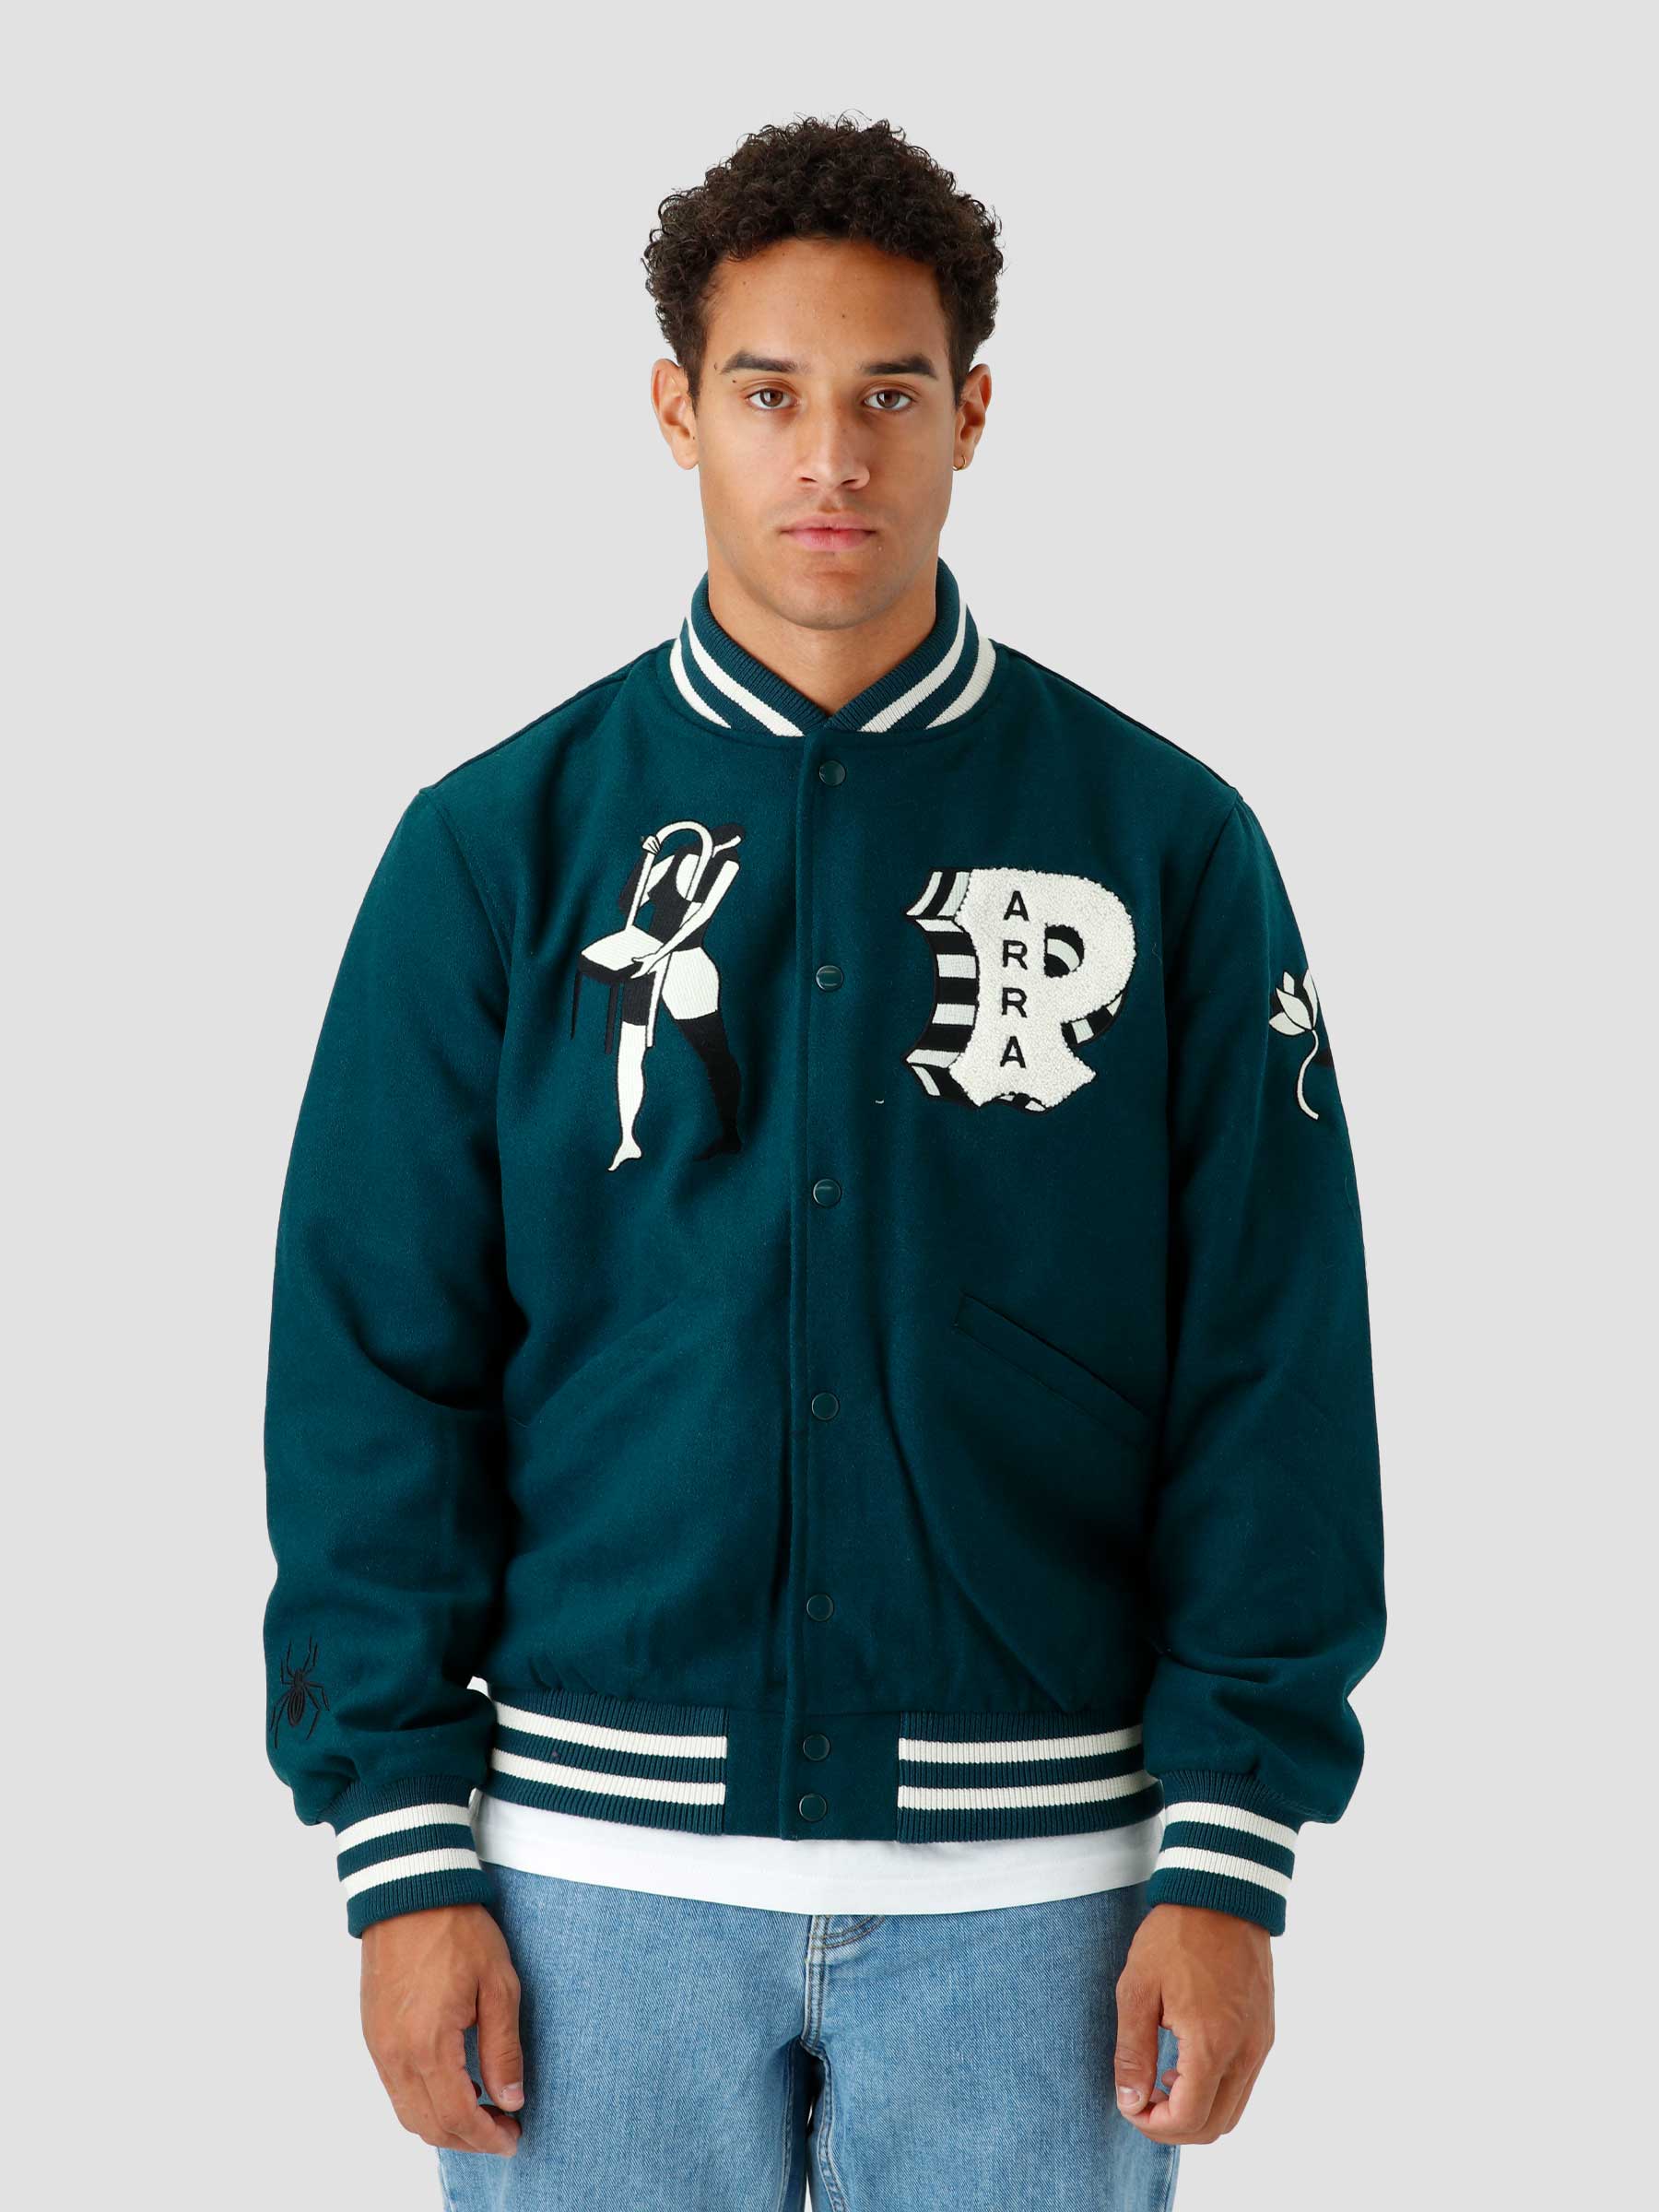 outfit picks week 35 ByParra Cloudy Star Varsity Jacket